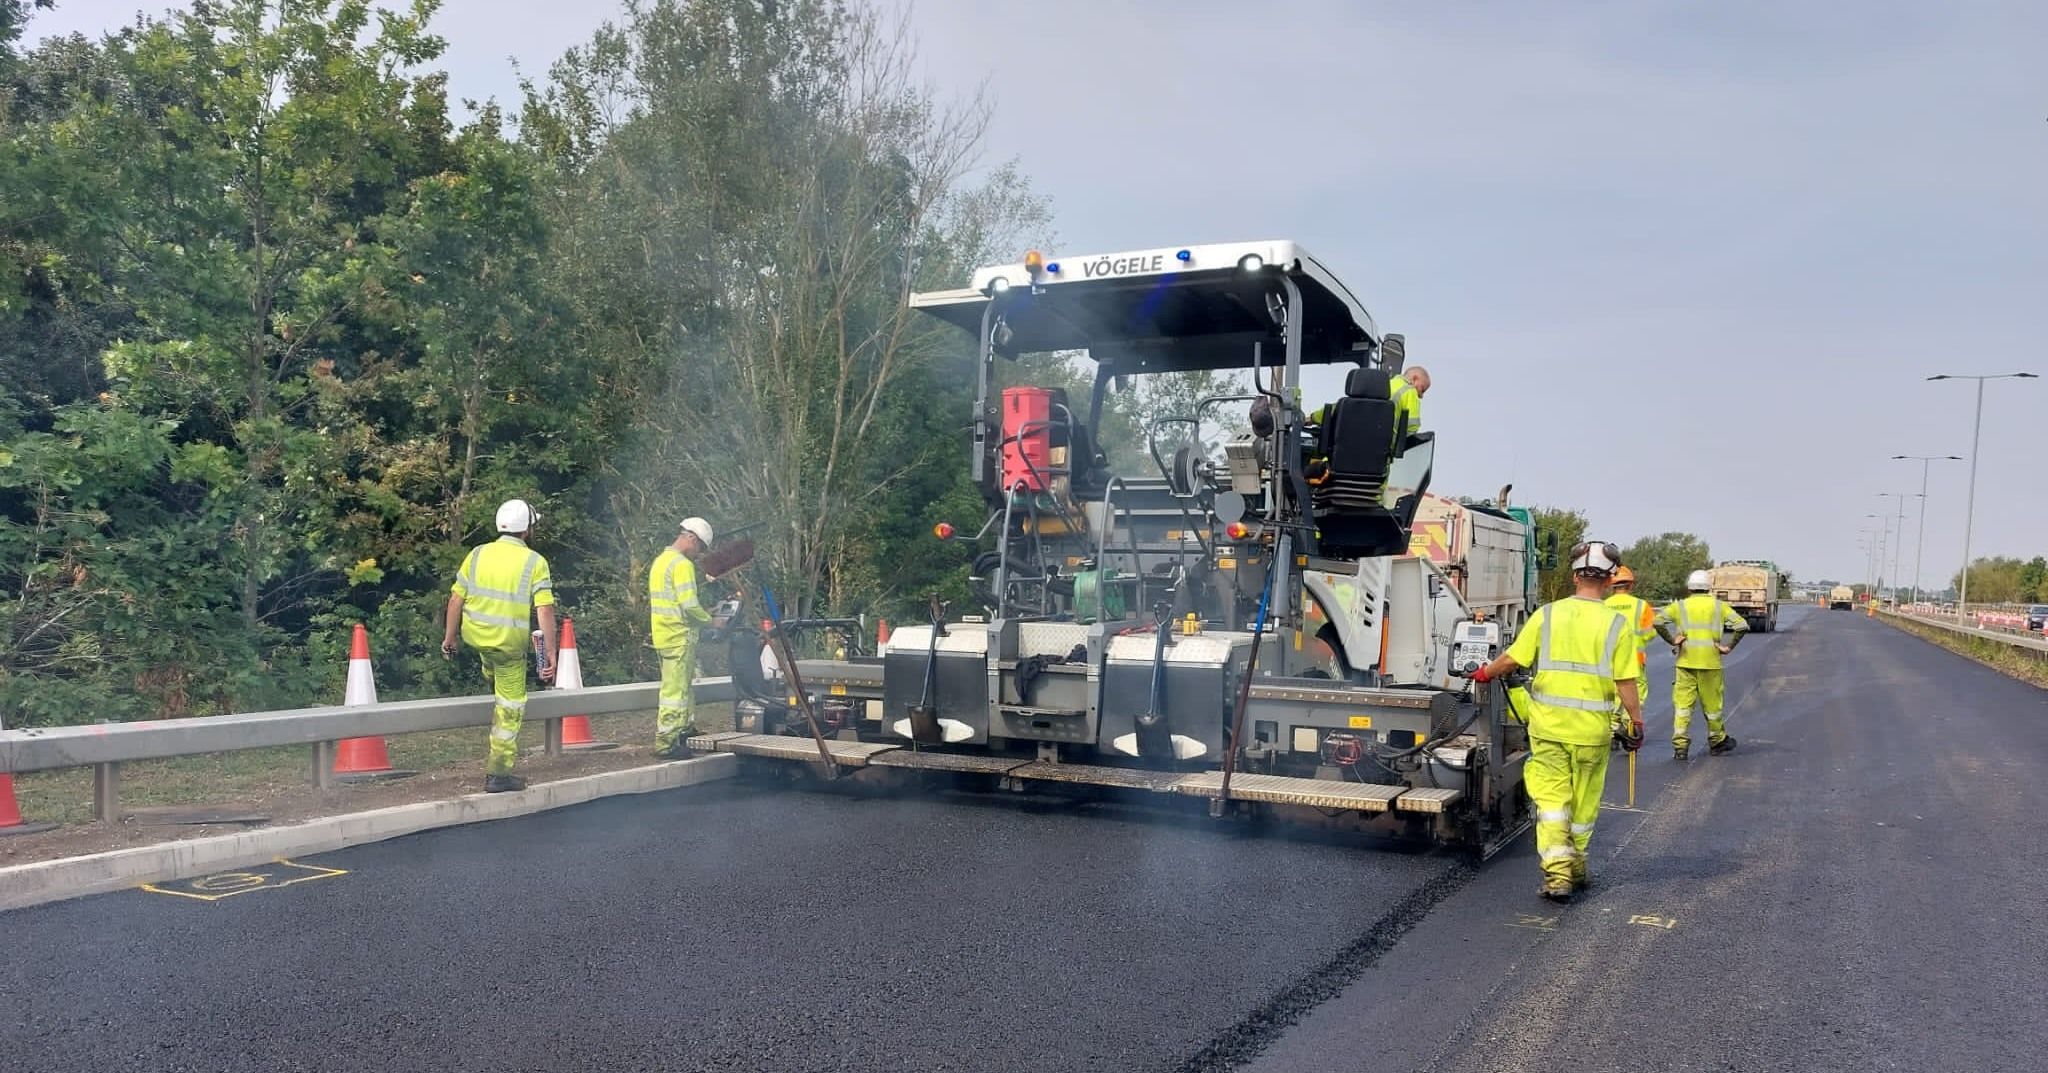 Workers carrying out road resurfacing work on the A6 by Bedford